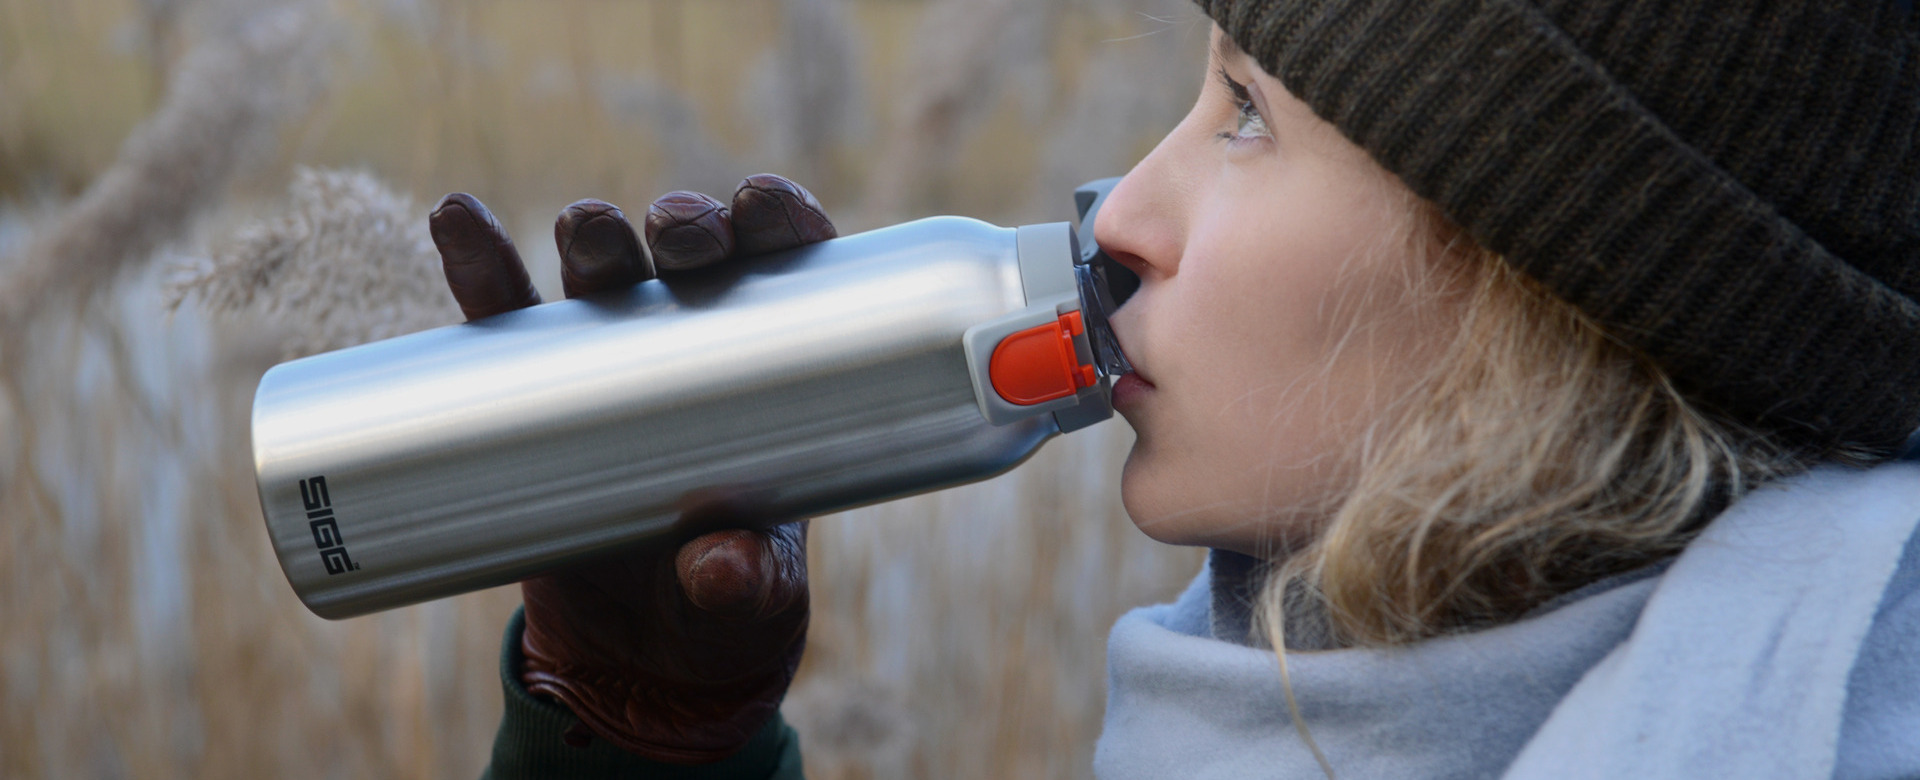 THERMO FLASKS TO STAY WARM - WINTER ESSENTIALS